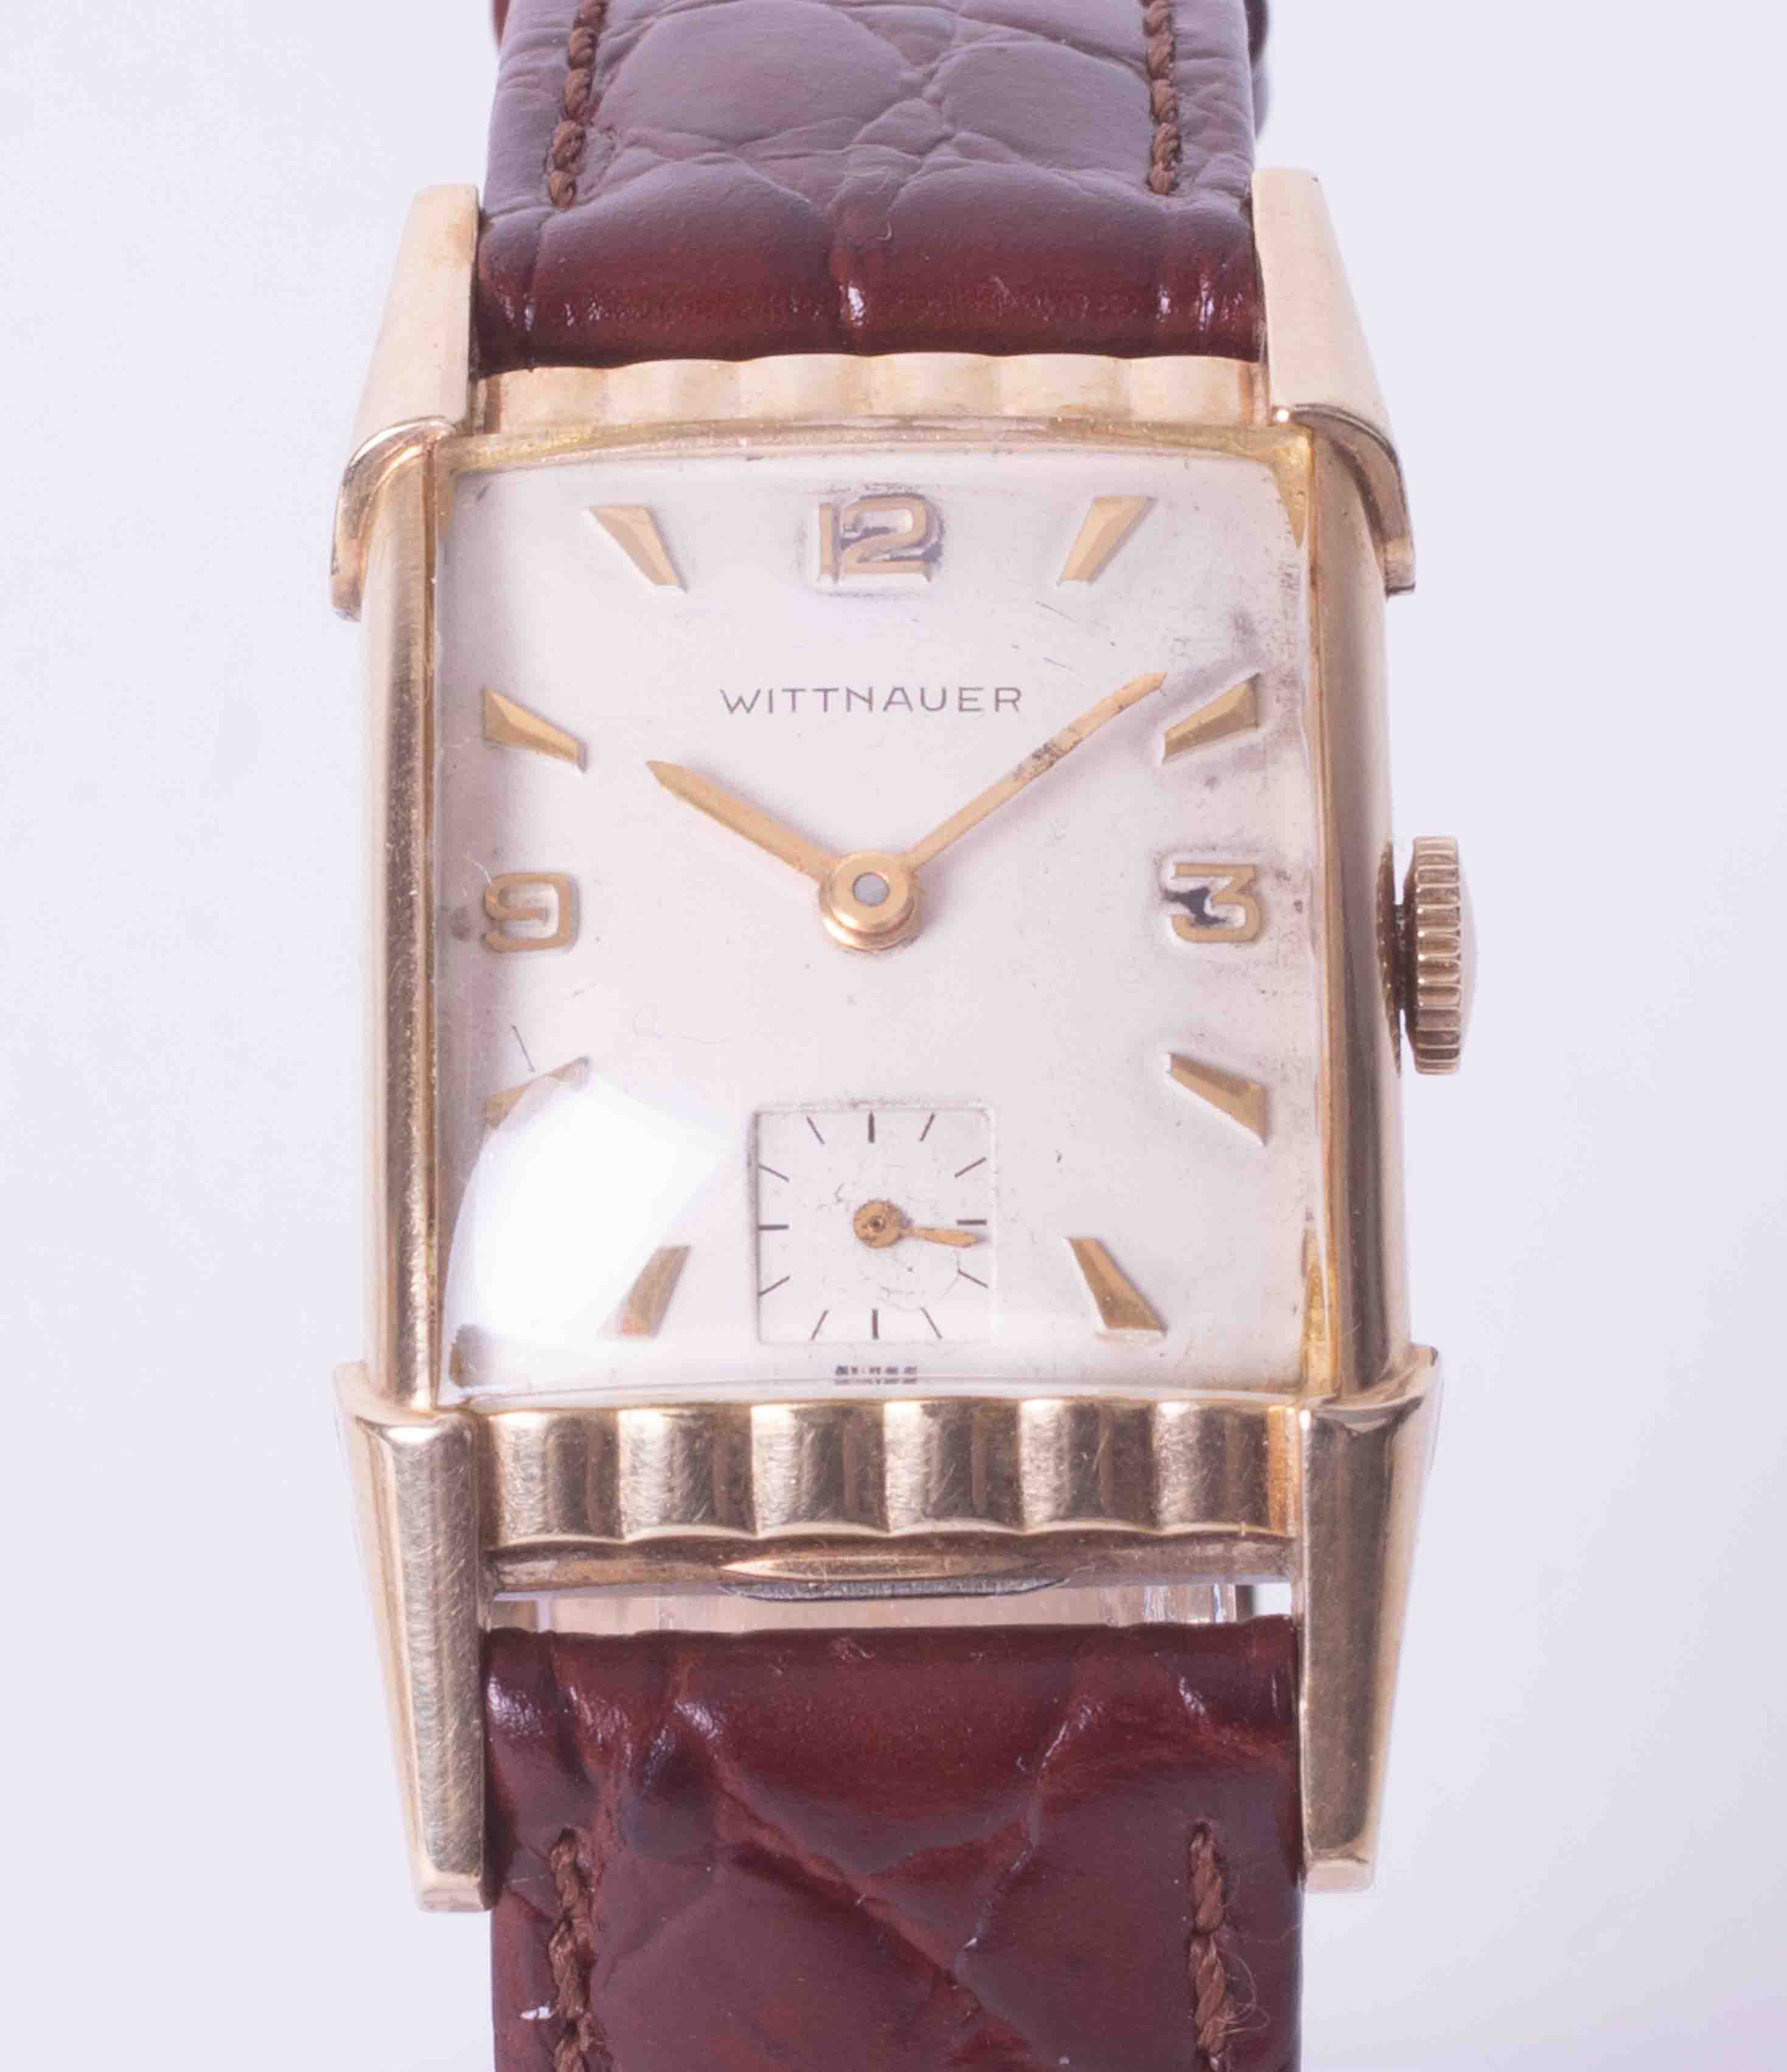 Longines, a gents mid size mechanical 'Wittnauer' wristwatch circa 1953, gold filled case and